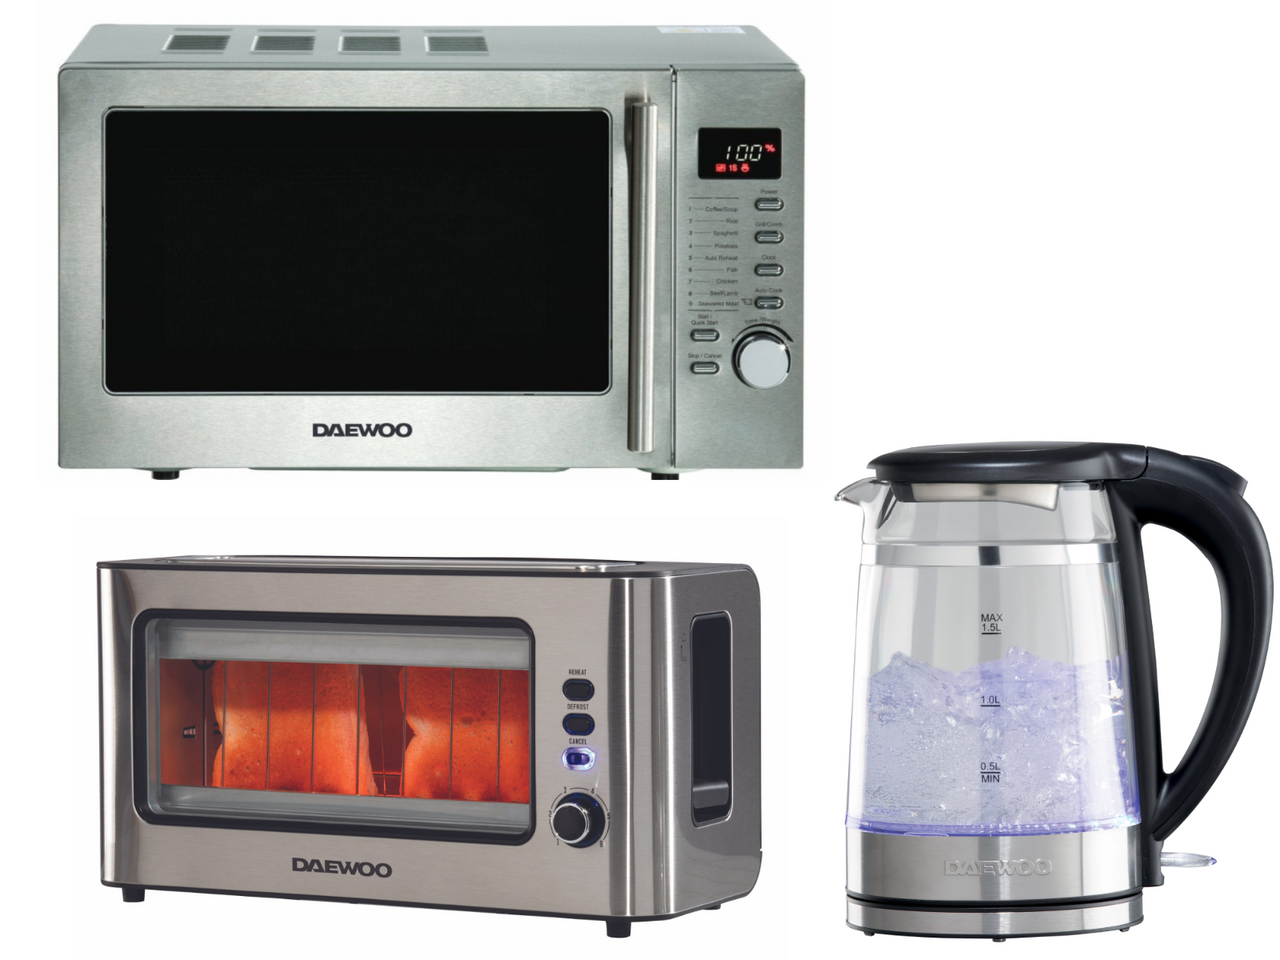 Daewoo 1.7L 3KW Glass Kettle, 2 Slice Glass Toaster & 20L 700W Microwave. Matching Set in Silver Stainless Steel & Glass